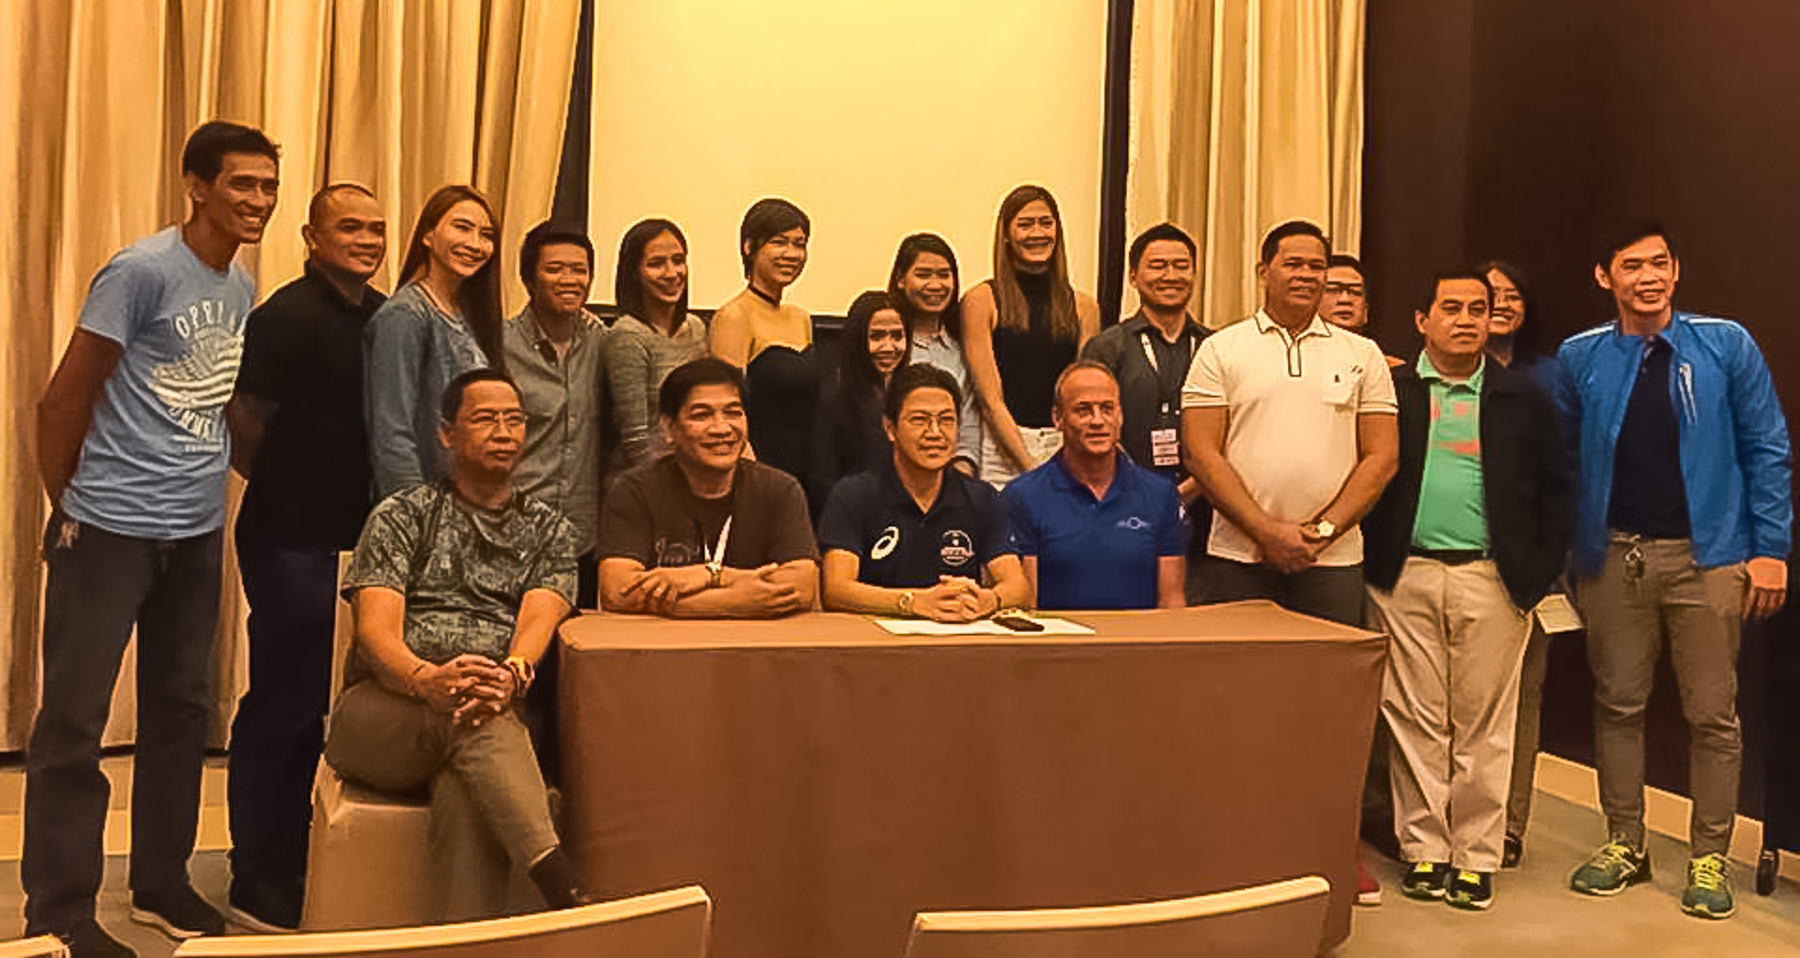 The local players, along with Philippine Superliga (PSL) president Ramon 'Tats' Suzara and Eventcourt CEO Peter Bratschi pose after the appointment of Japanese mentor Shun Takahasi as the team's coach for the FIVB Women's Club World Championship Thursday night at the Crimson Hotel. The FIVB Women's Club World Championship is set Oct. 18-23 at the SM-MOA Arena.  